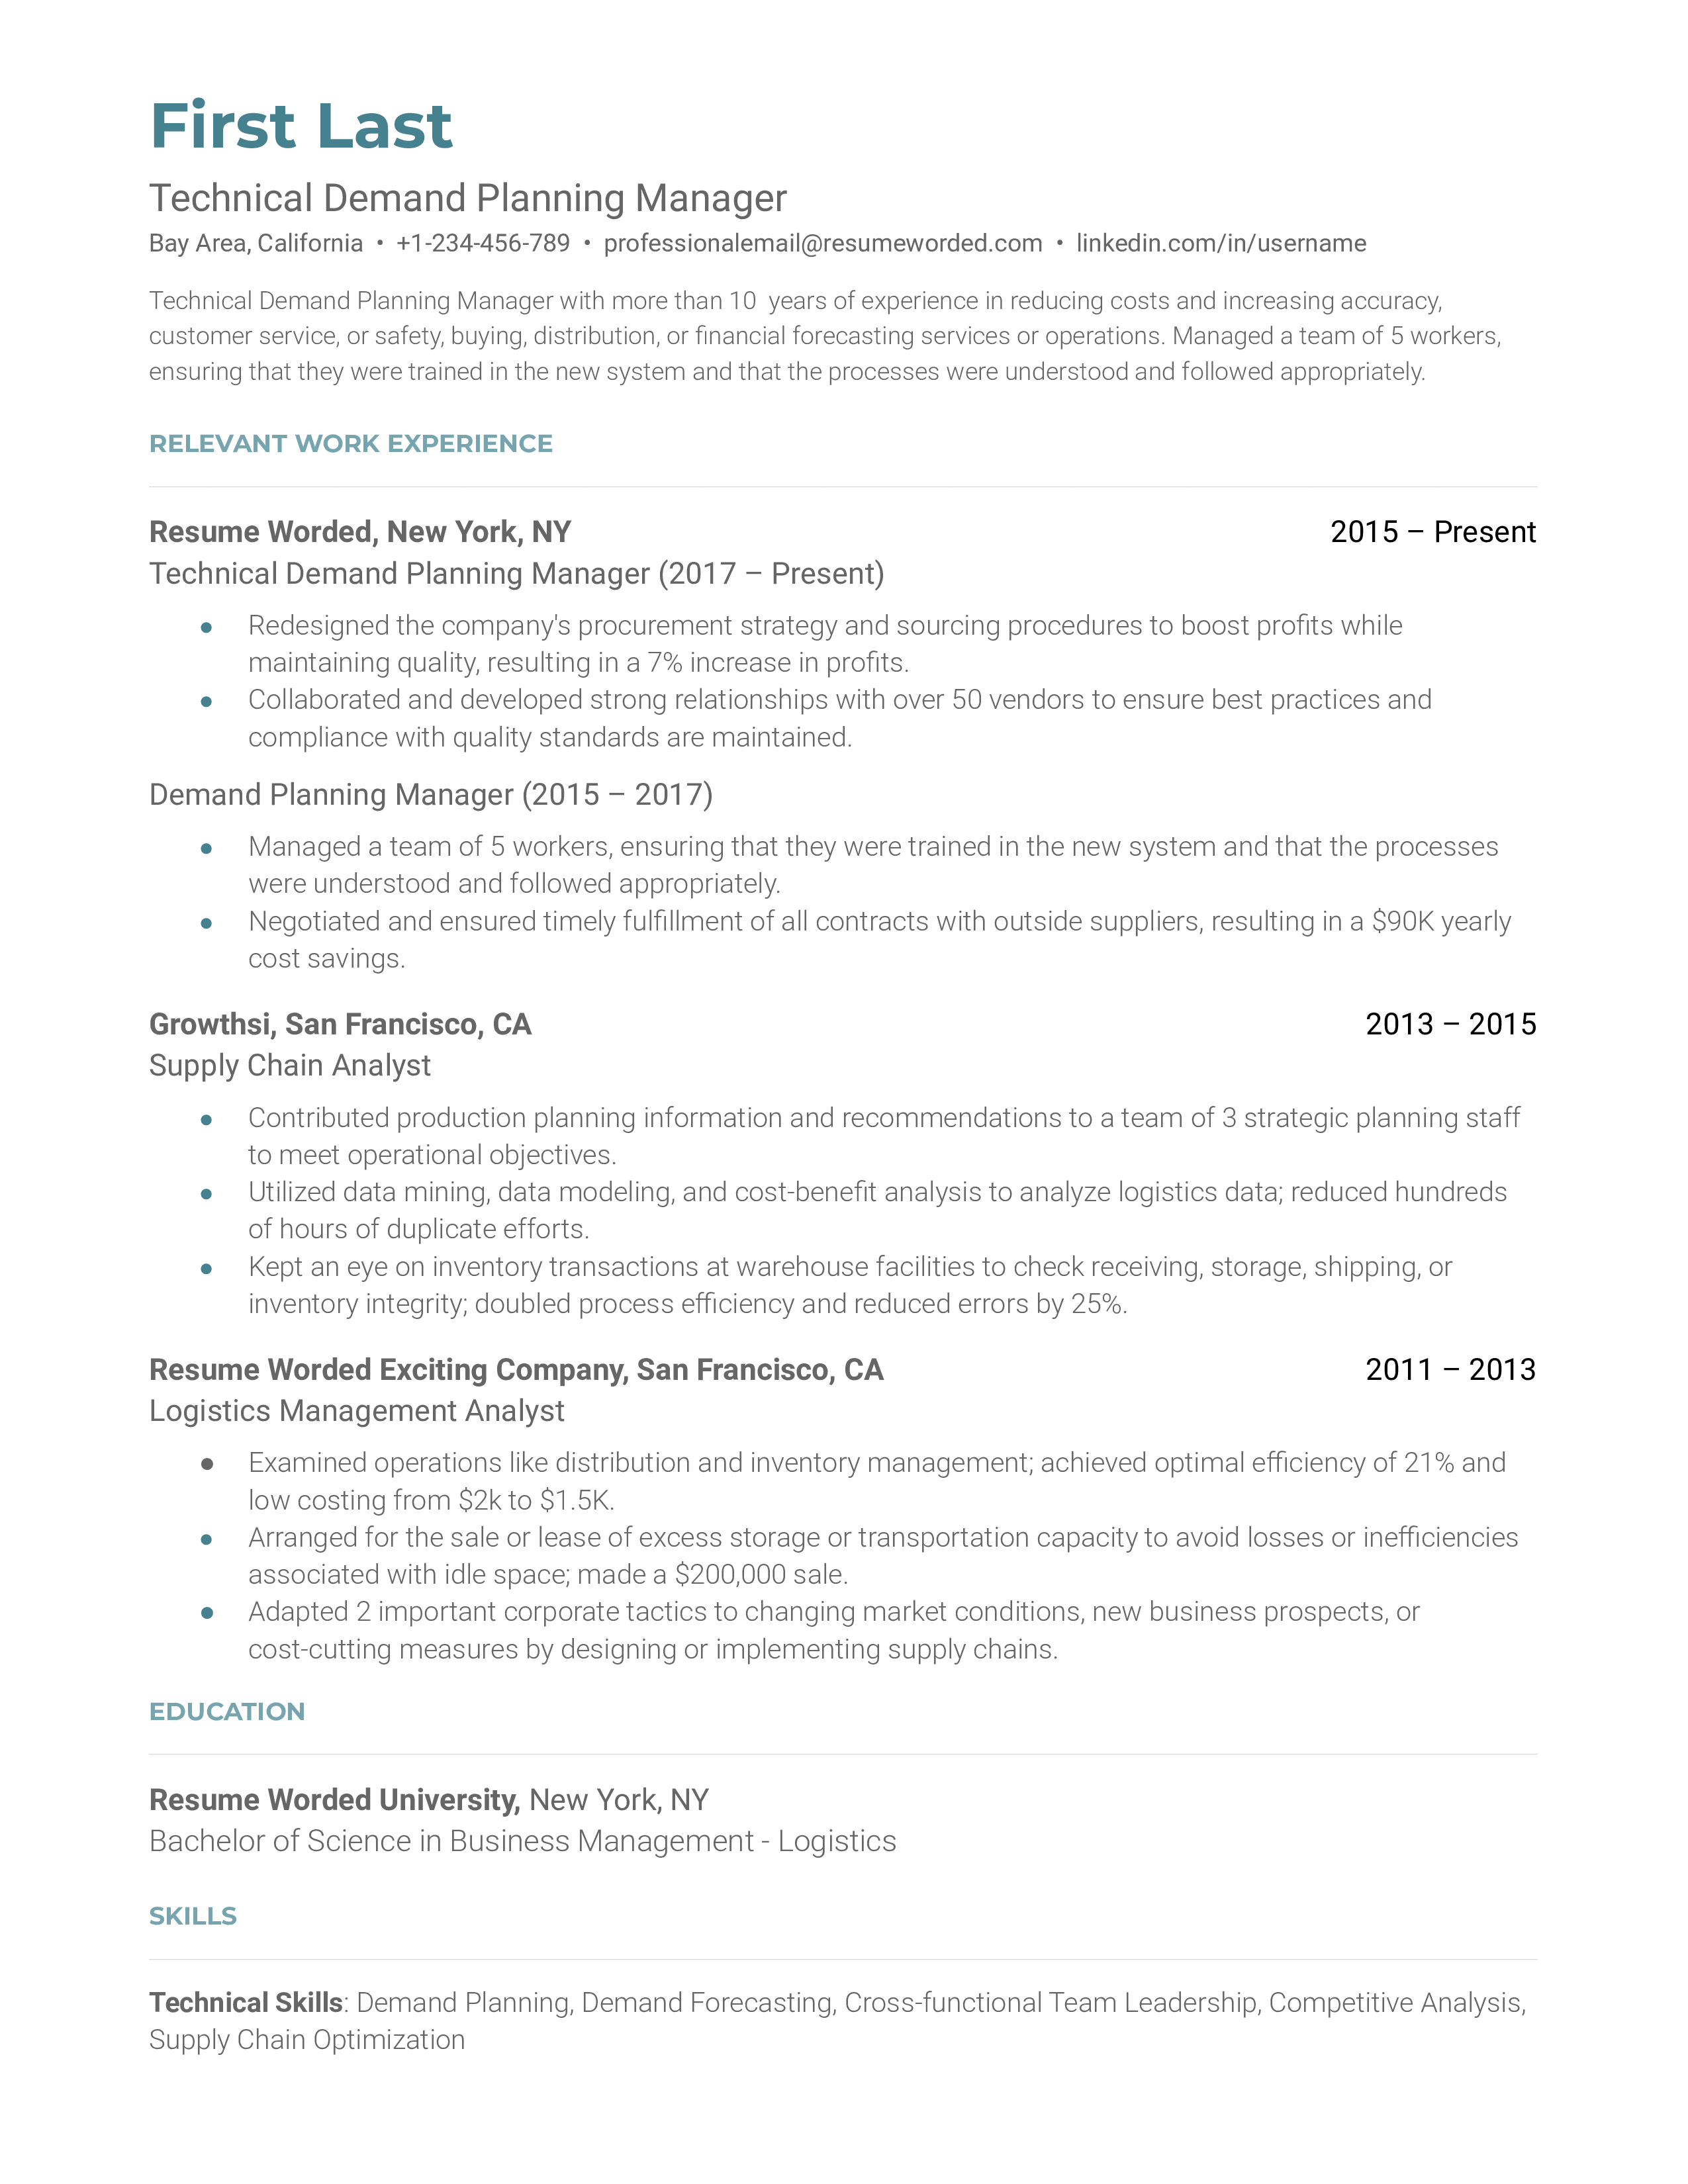 An example of a technical demand planning manager resume for 2023